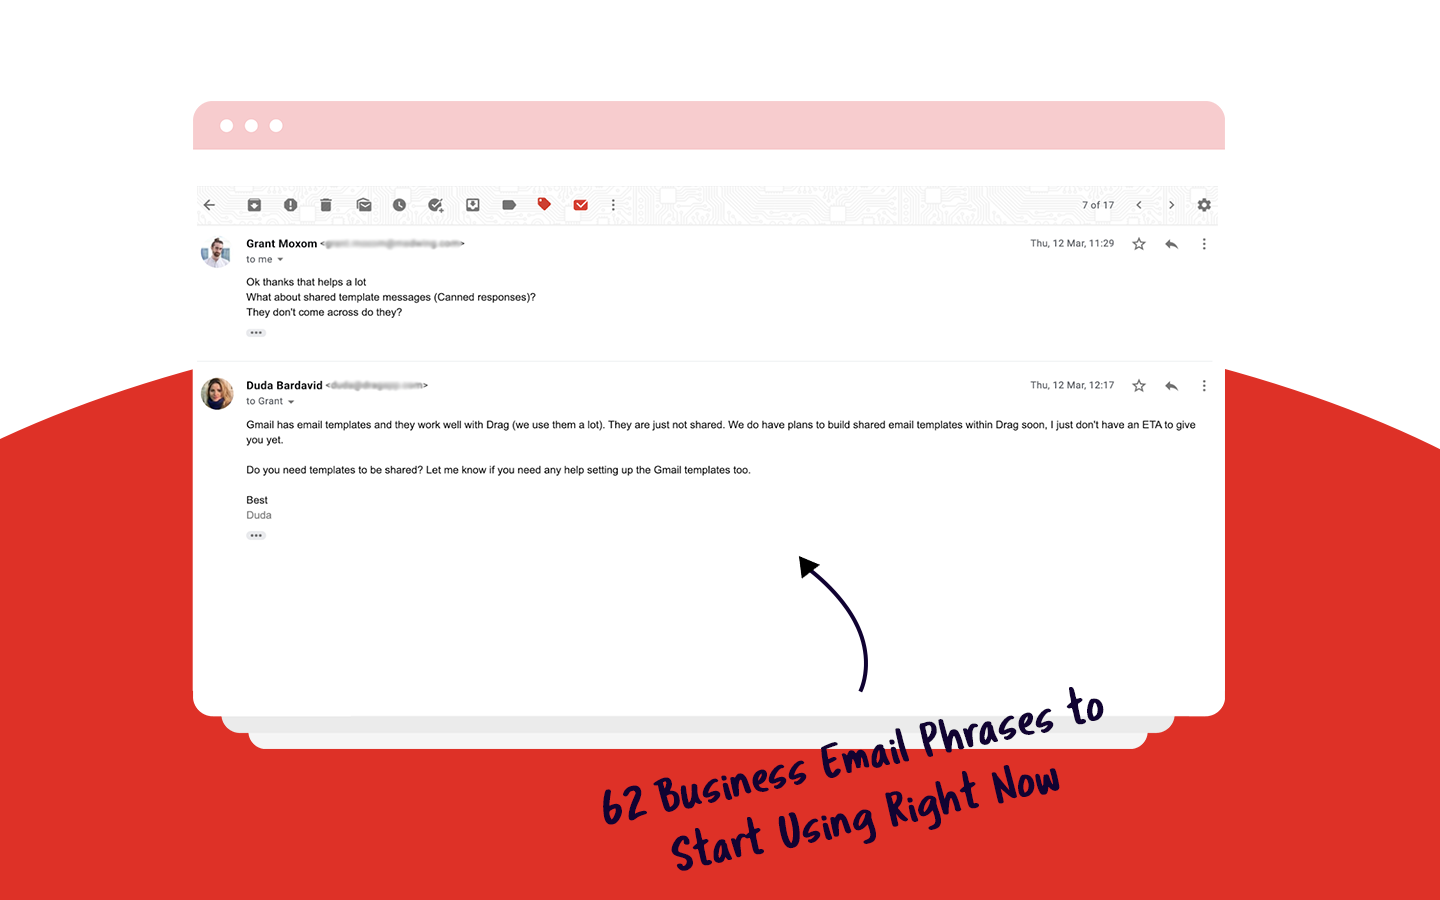 Email Phrases to Start Using Right Now in Business - Drag